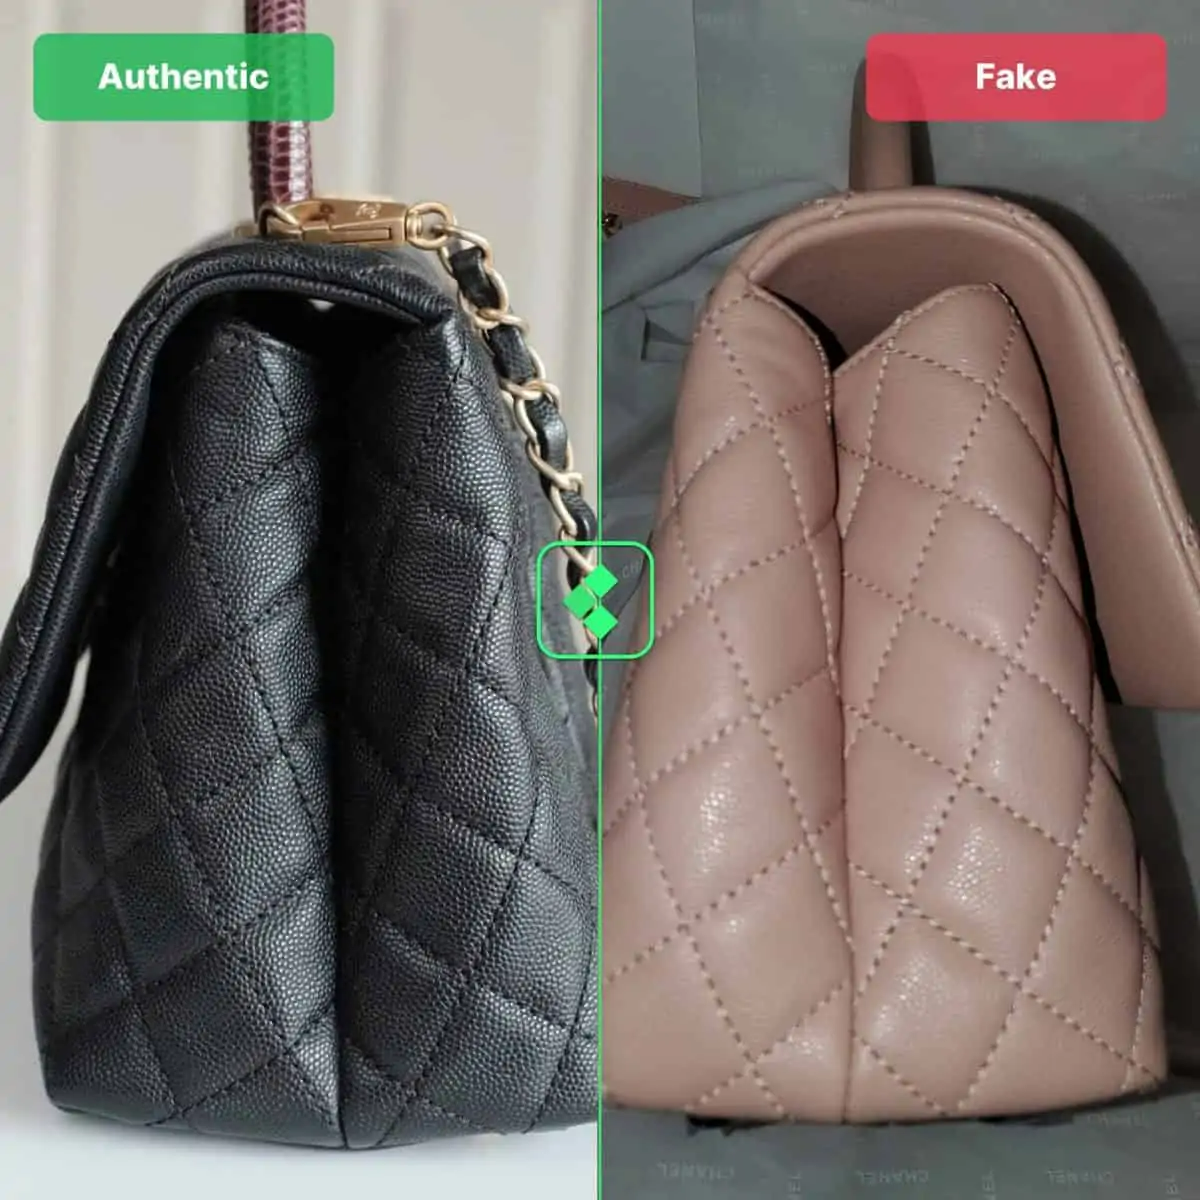 CHANEL FAKE VS REAL  CHANEL AUTHENTICATION  COMPARING A CHANEL 19  AUTHENTIC TO A FAKE  DH GATE  YouTube